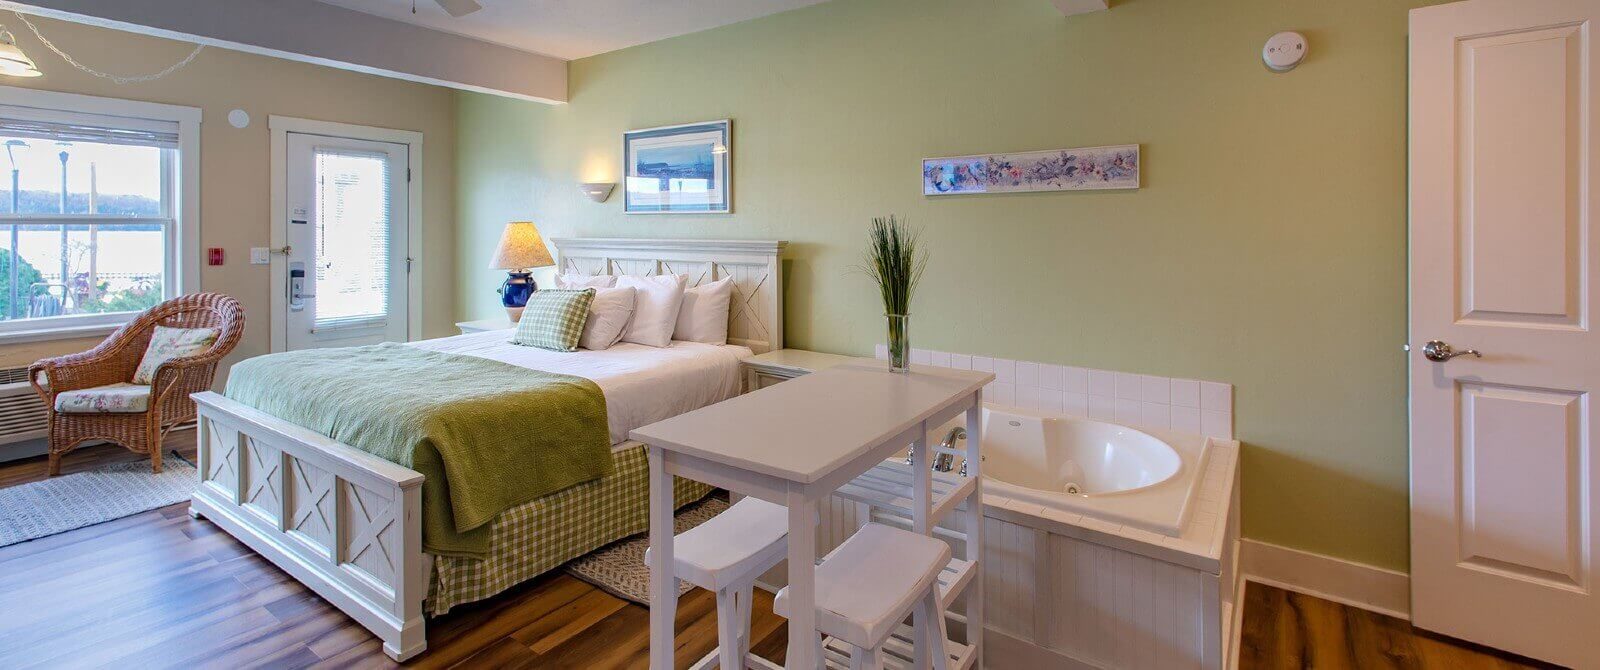 Large bedroom with king bed, soaker tub, side table with lamp, bistro table with stools and hardwood floors